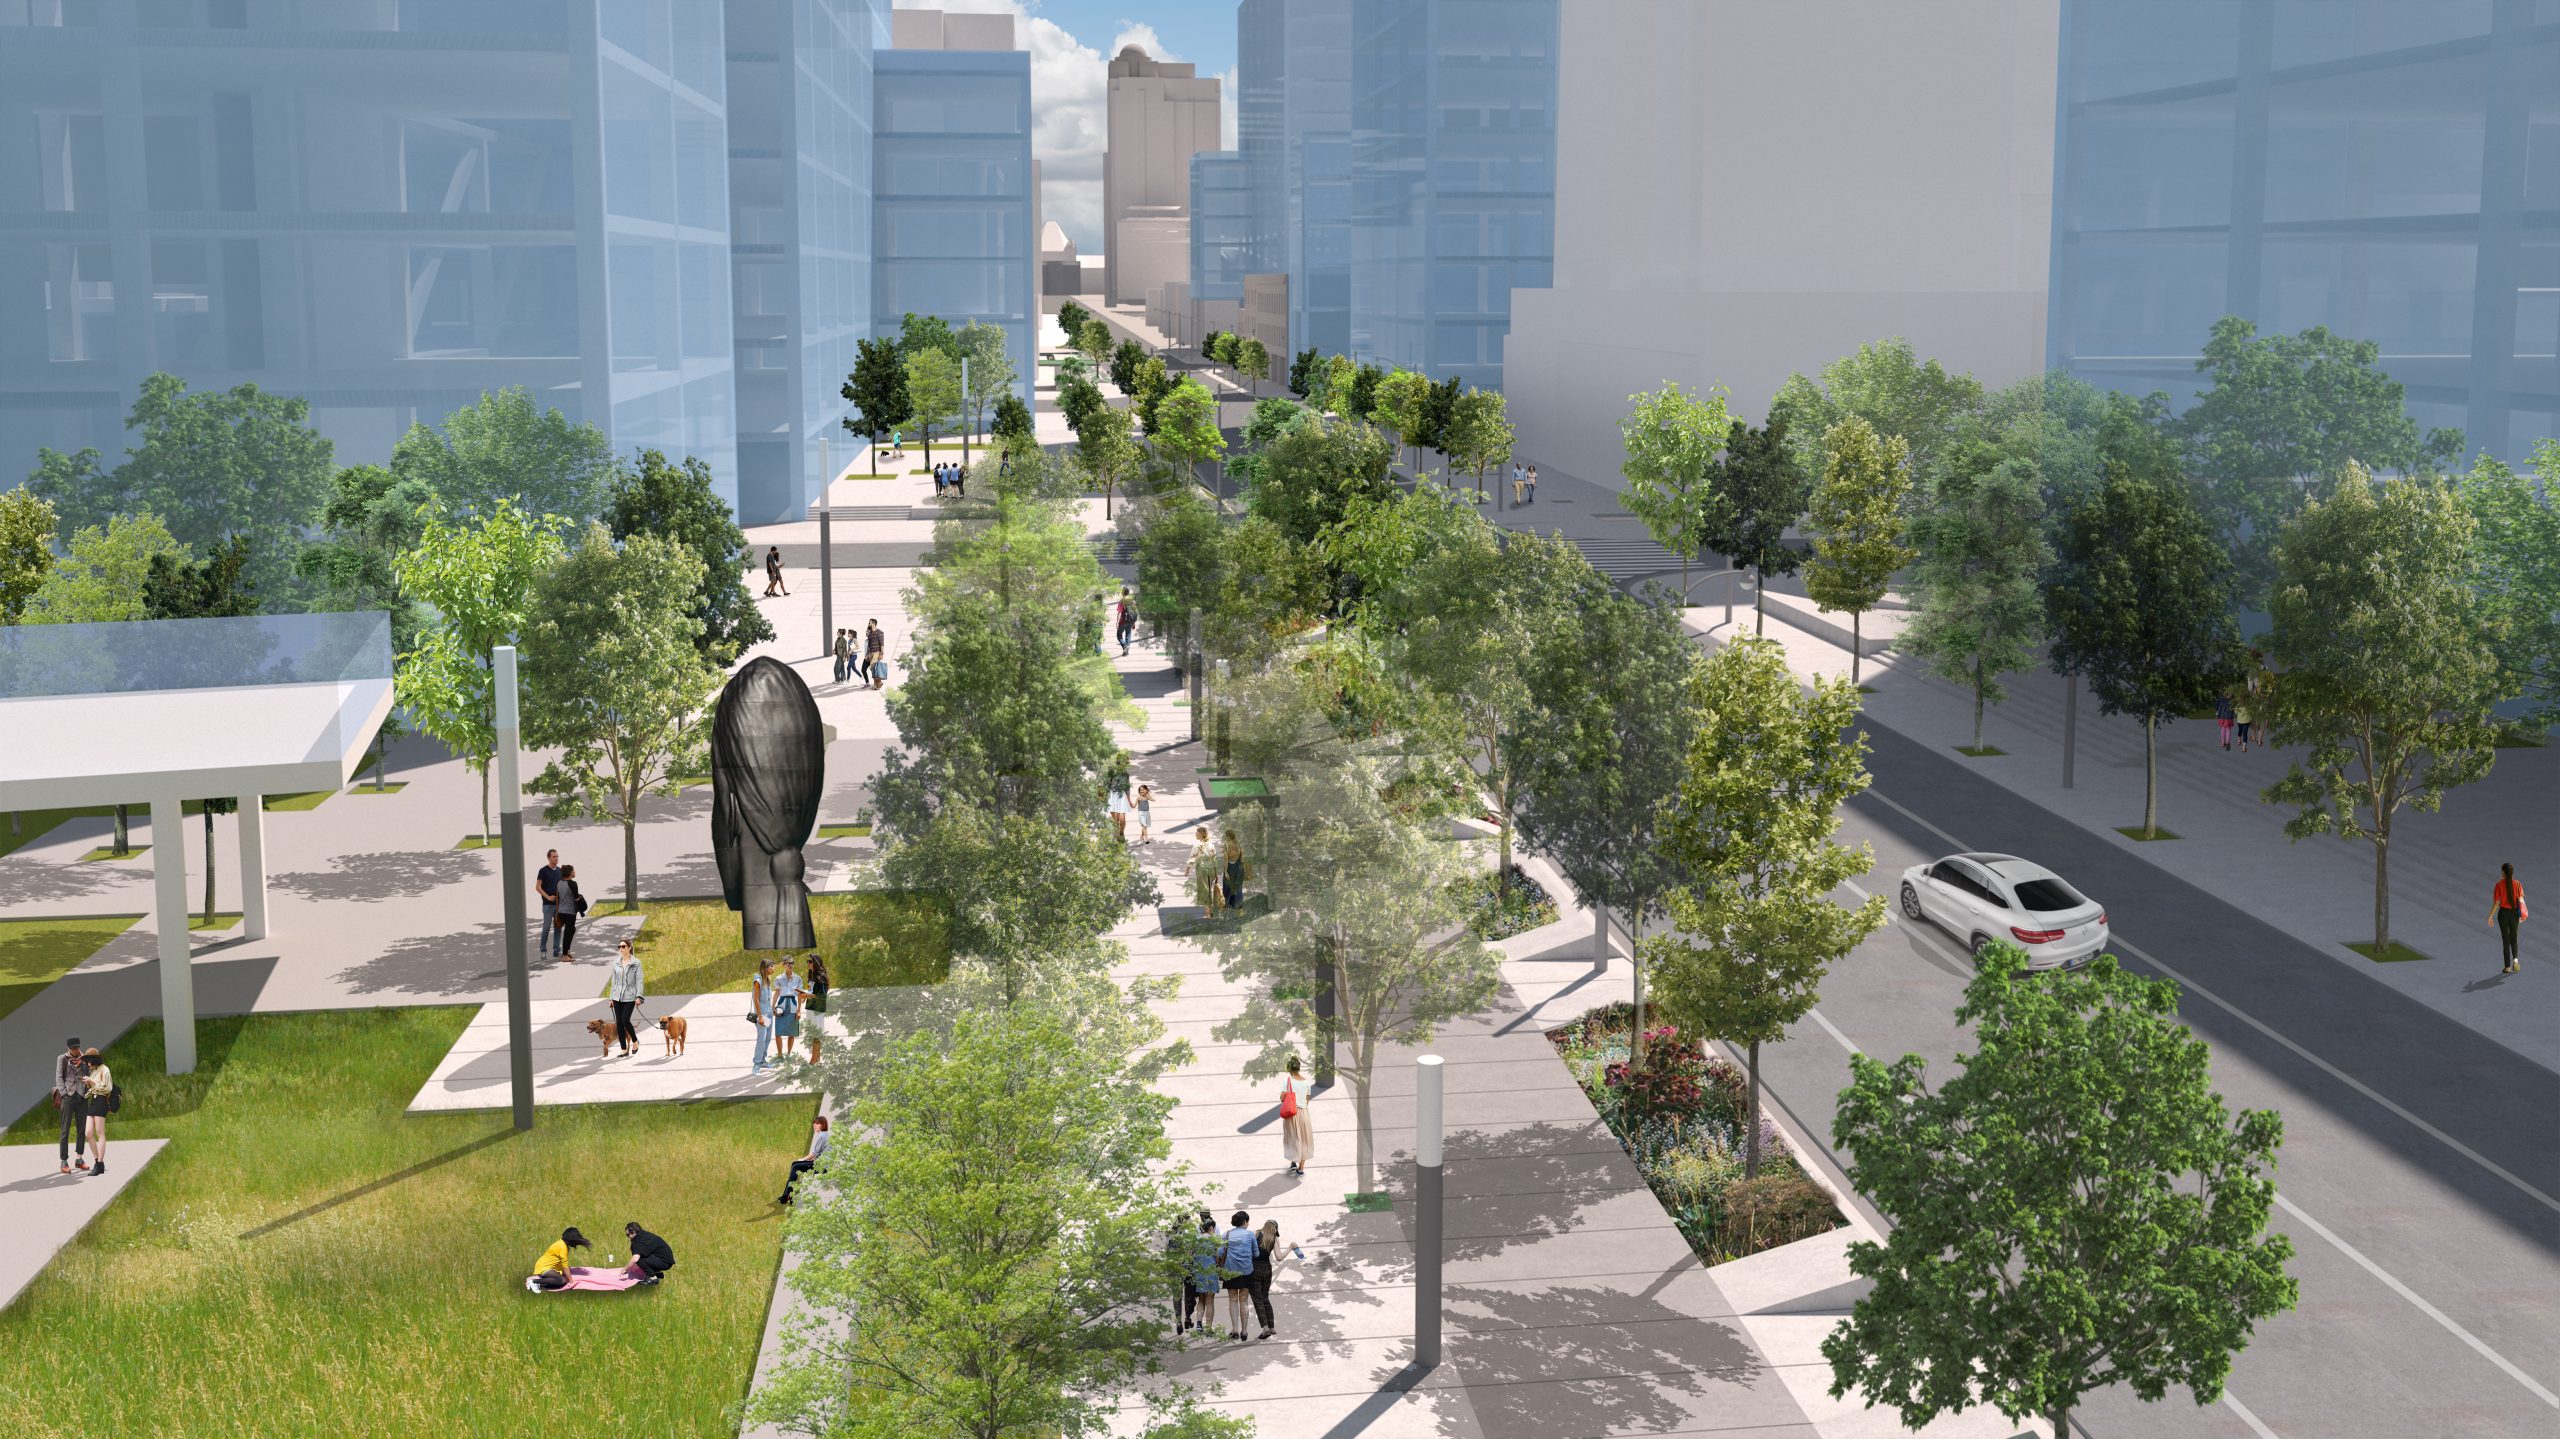 Avenue Road: Re-inventing and Pedestrianizing the Avenue